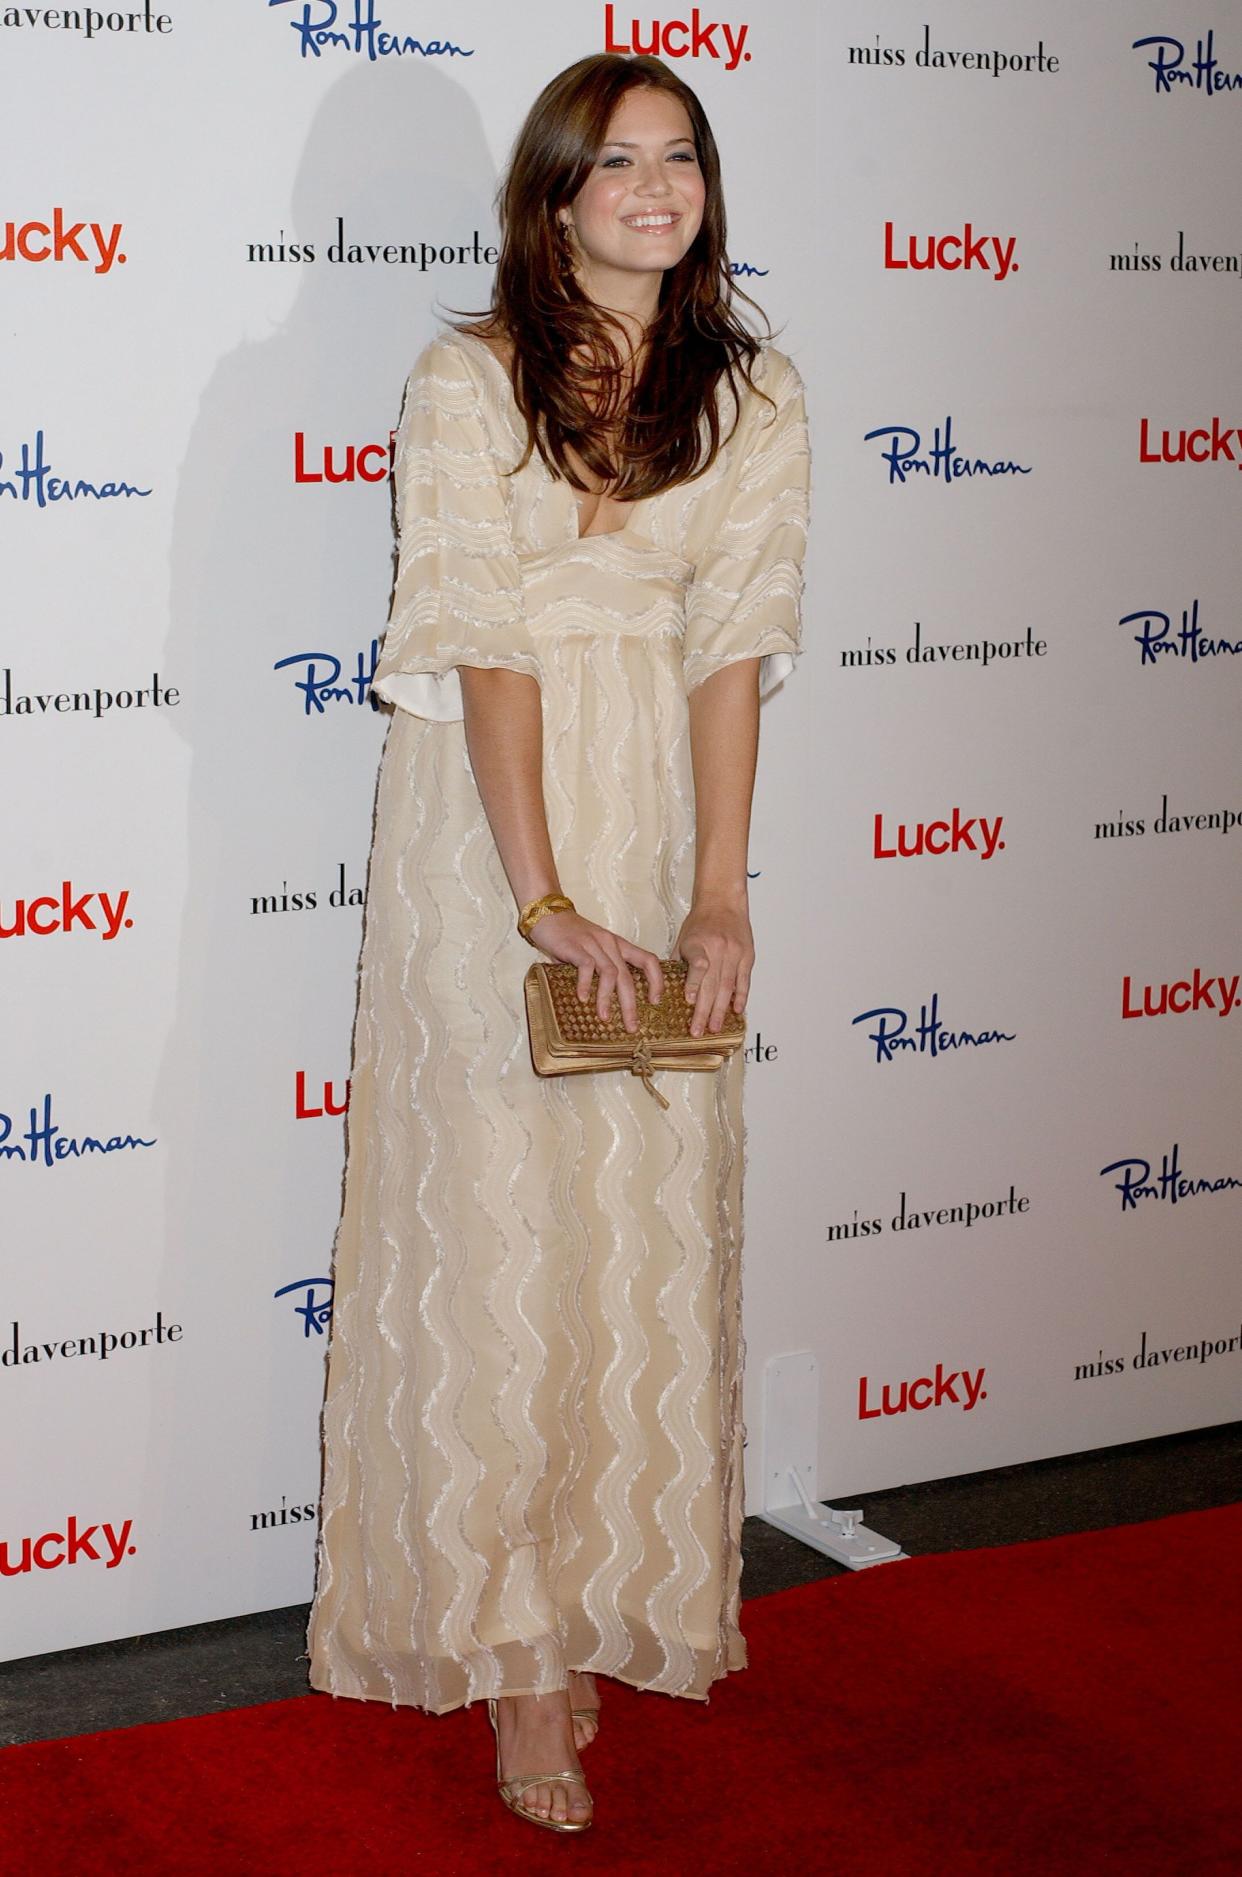 Moore during the Lucky Magazine Hosts Miss Davenporte Trunk Show at Ron Herman in Los Angeles.